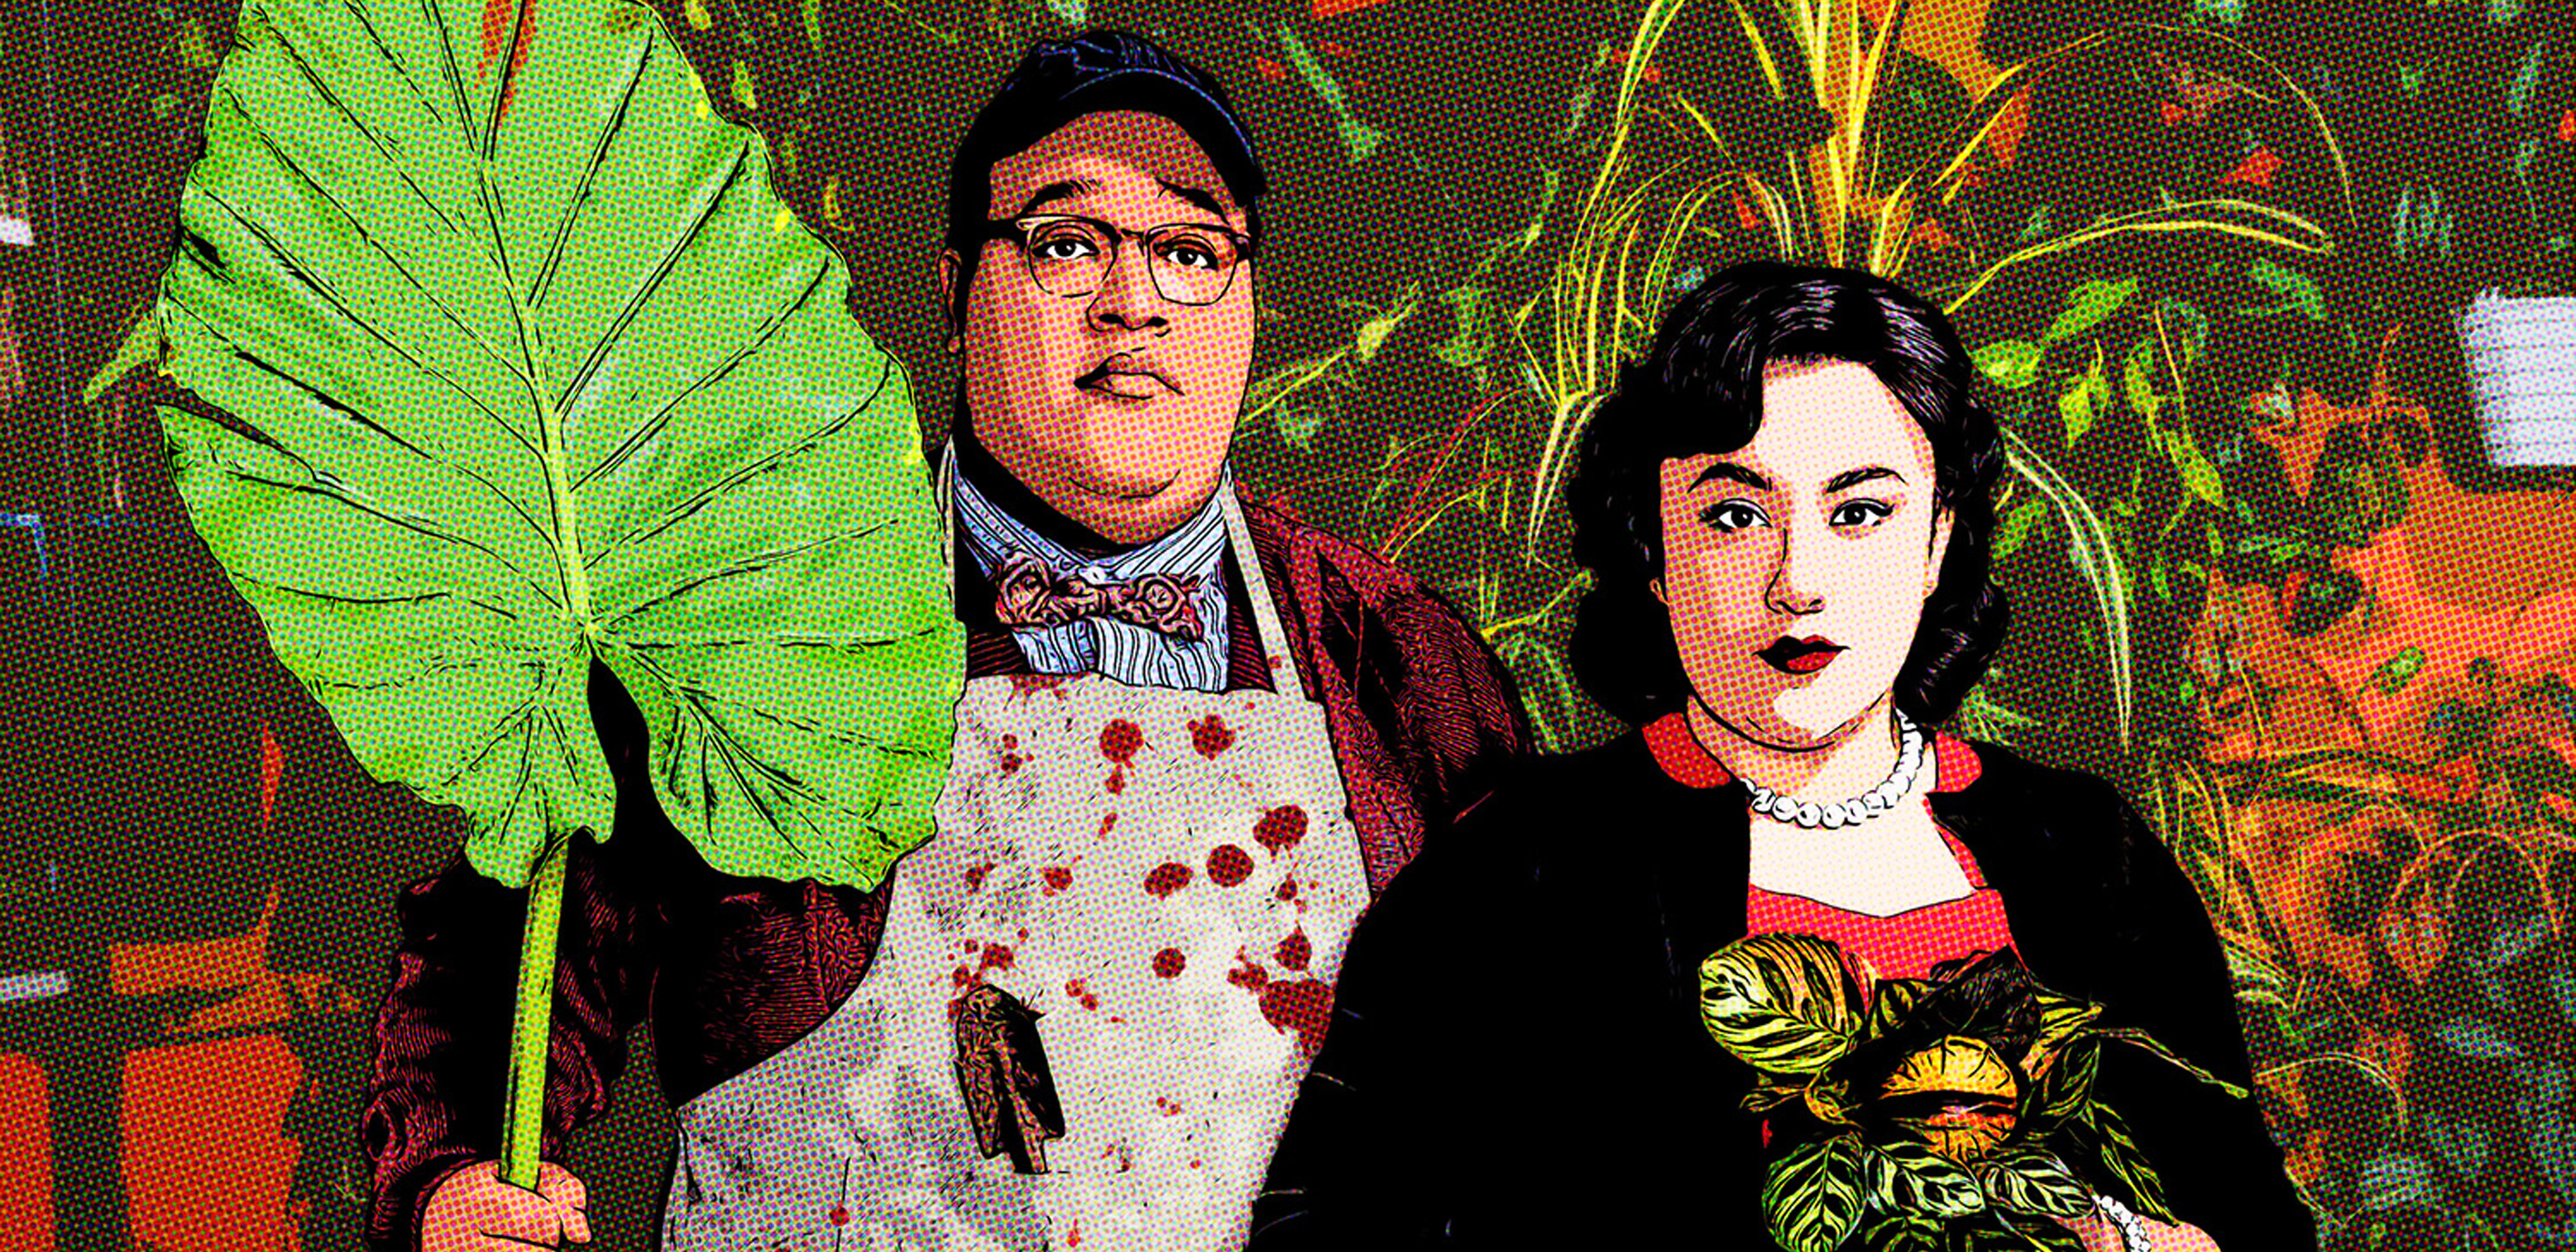 A pop art rendering in comic book style of a Black man and Asian woman, both holding up plants with serious expressions a la “American Gothic.”